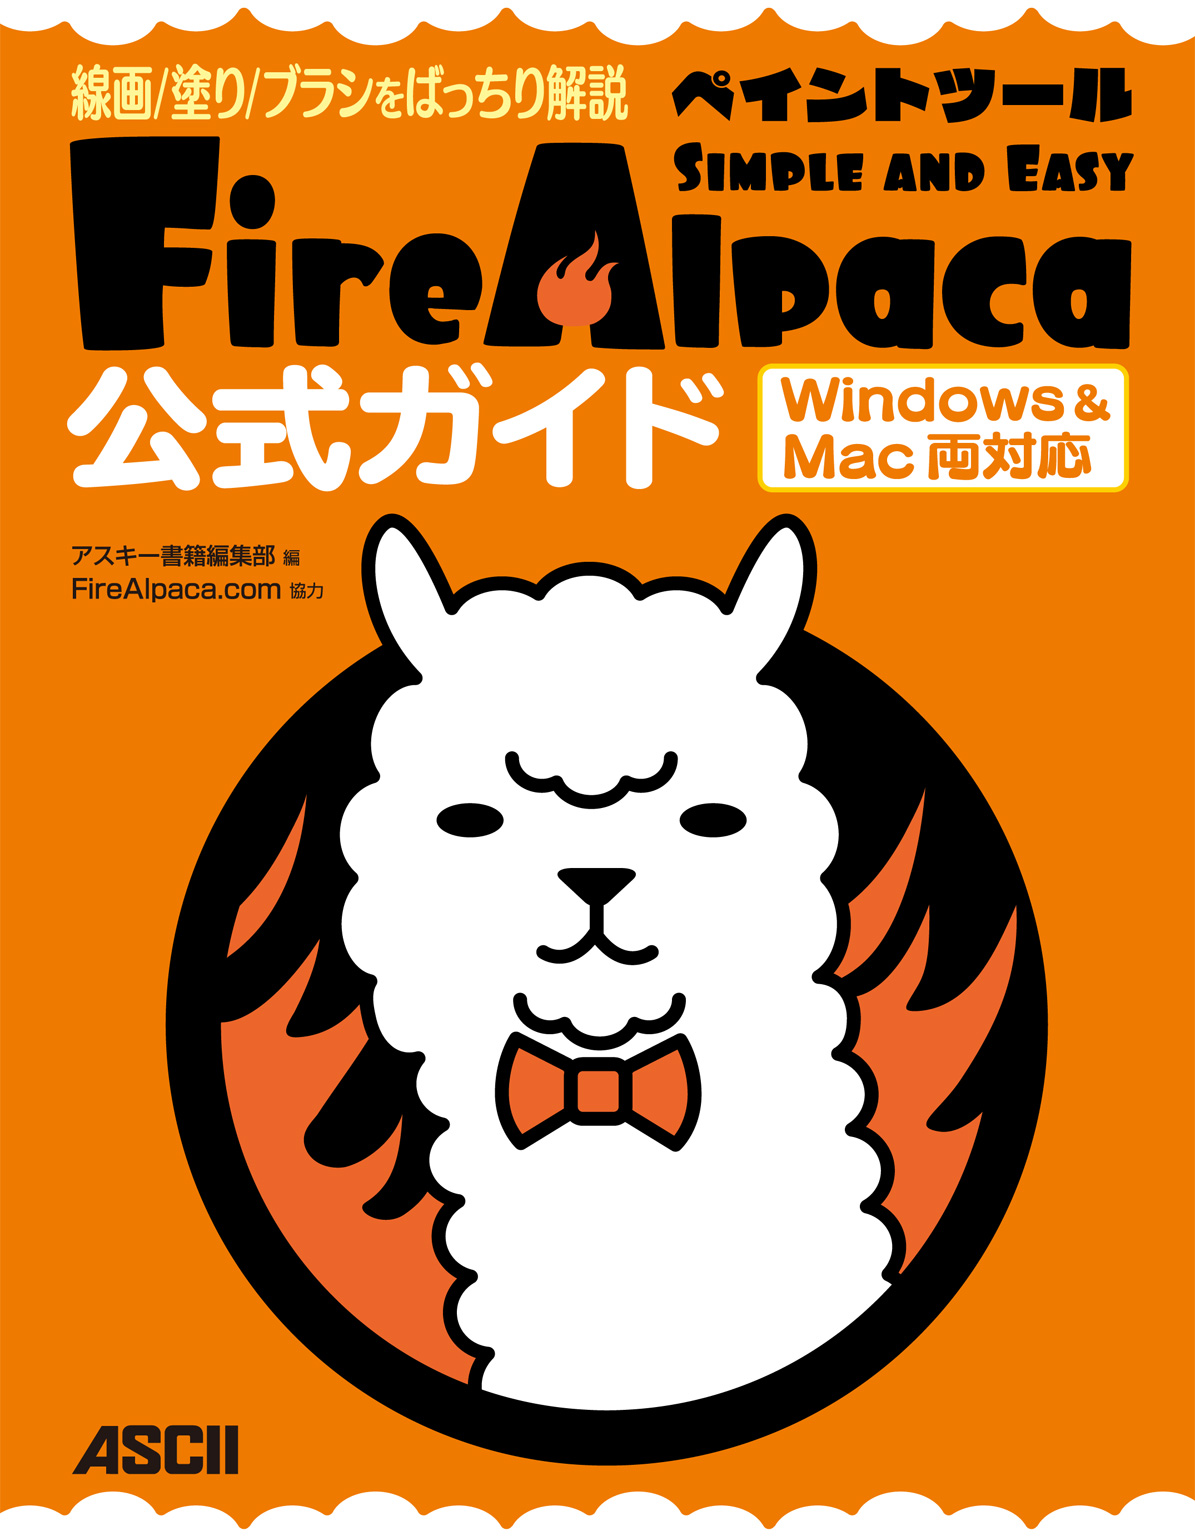 firealpaca resize lose quality